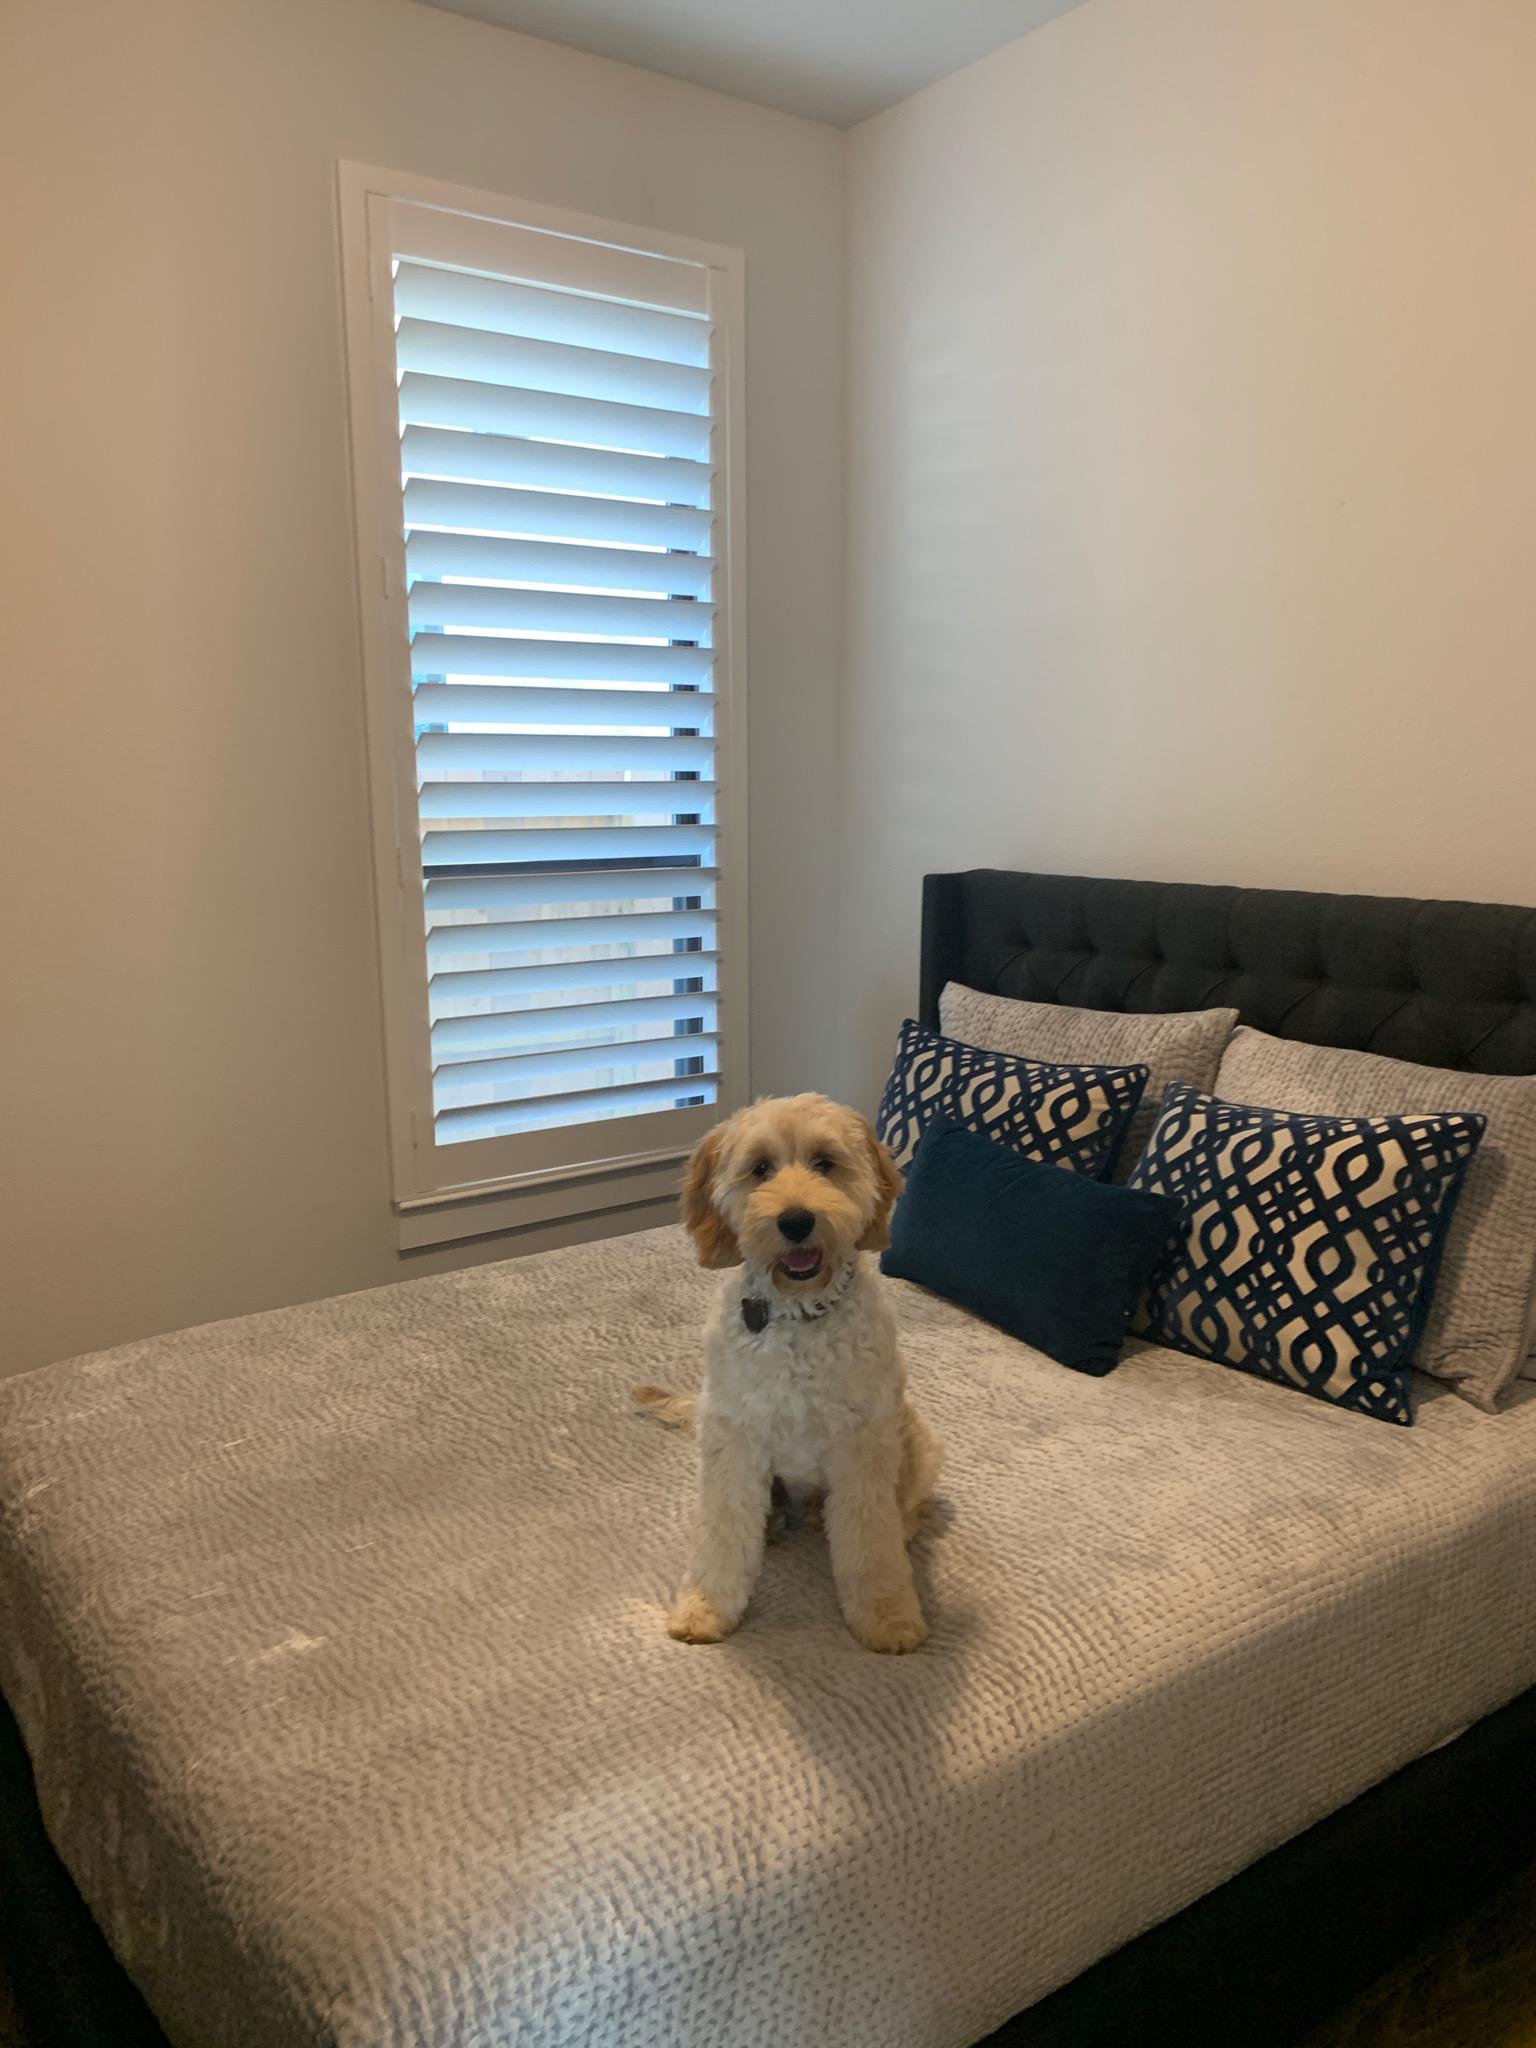 This pup loves the Plantation Shutters in this Katy bedroom! He’s happy that he can relax in style—and plenty of shade when it gets too sunny out!